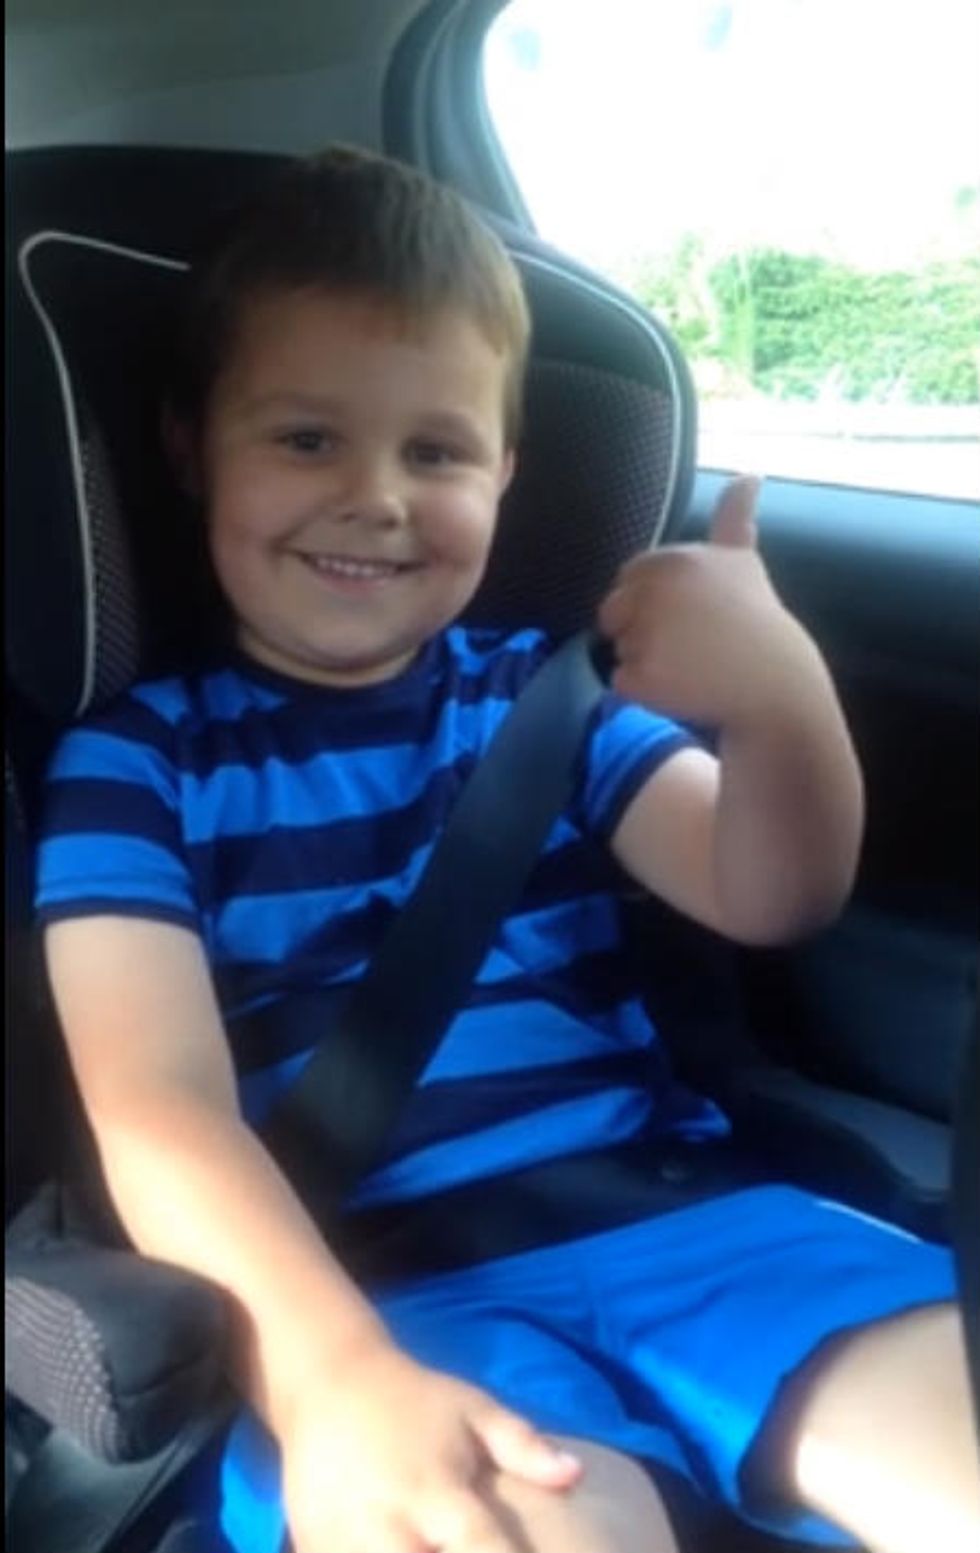 Watch This 5-Year-Old's Perfect Reaction About Becoming a Big Brother